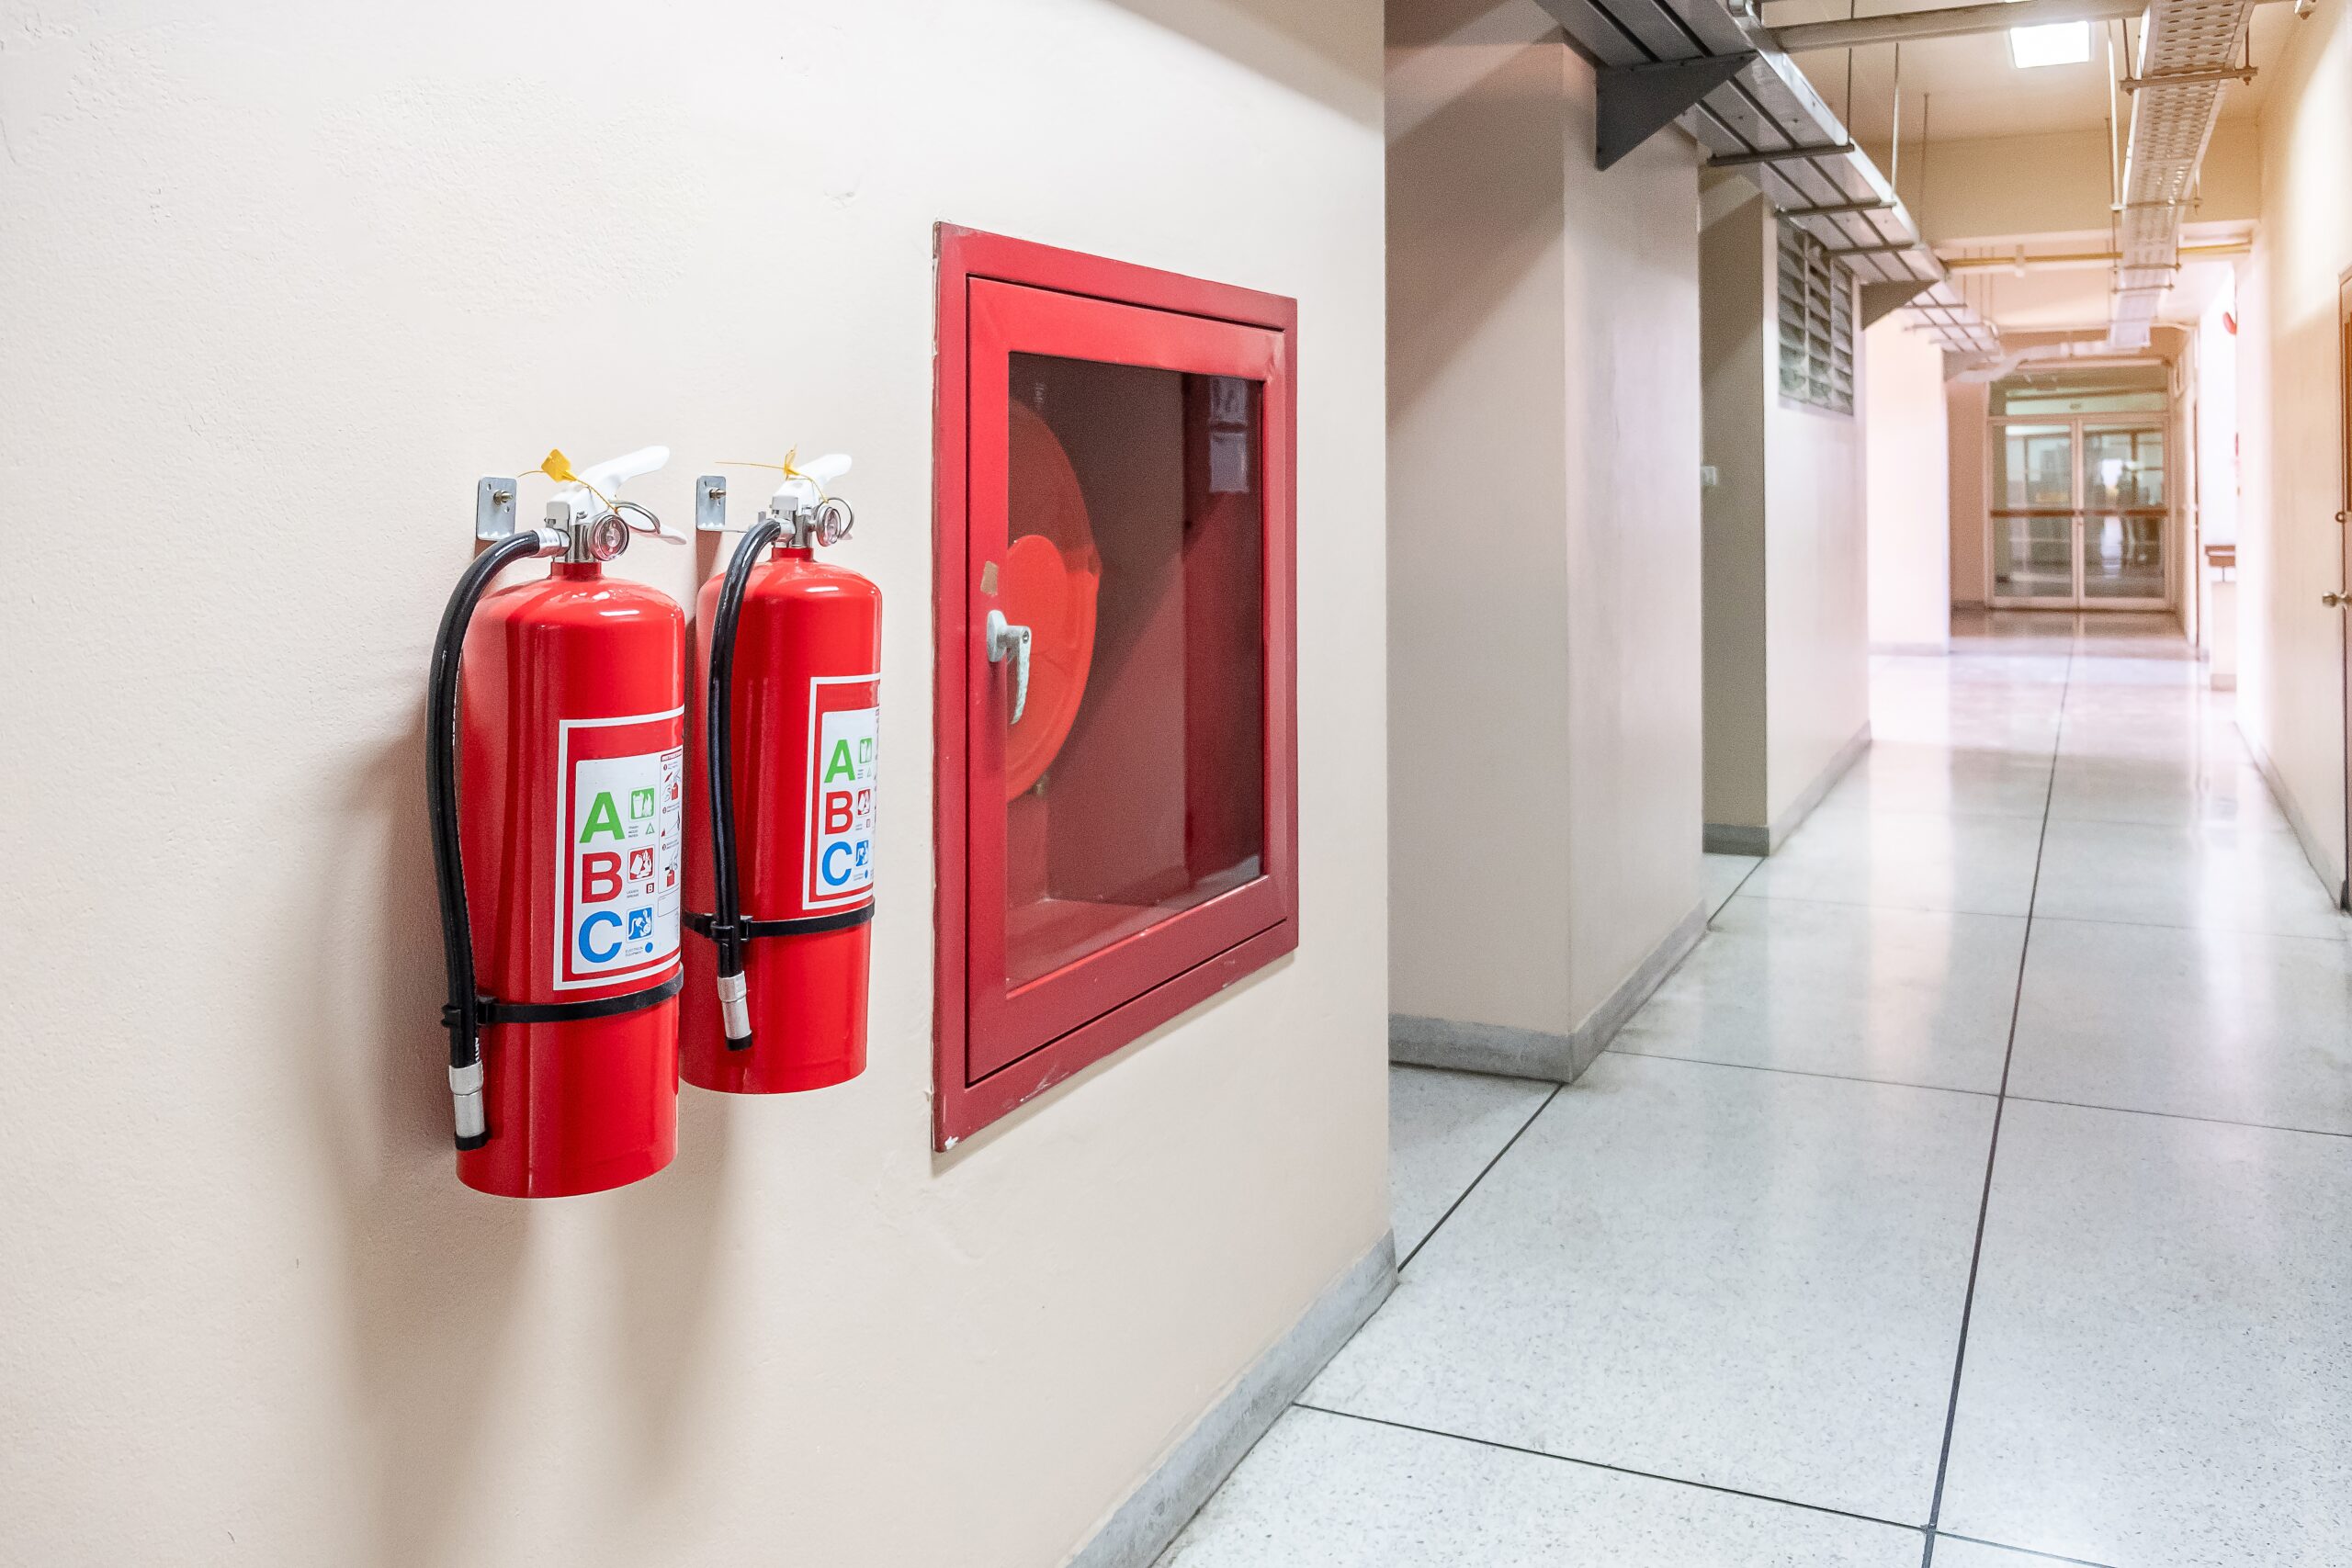 Fire safety in your condo association starts with basic equipment like fire extinguishers.